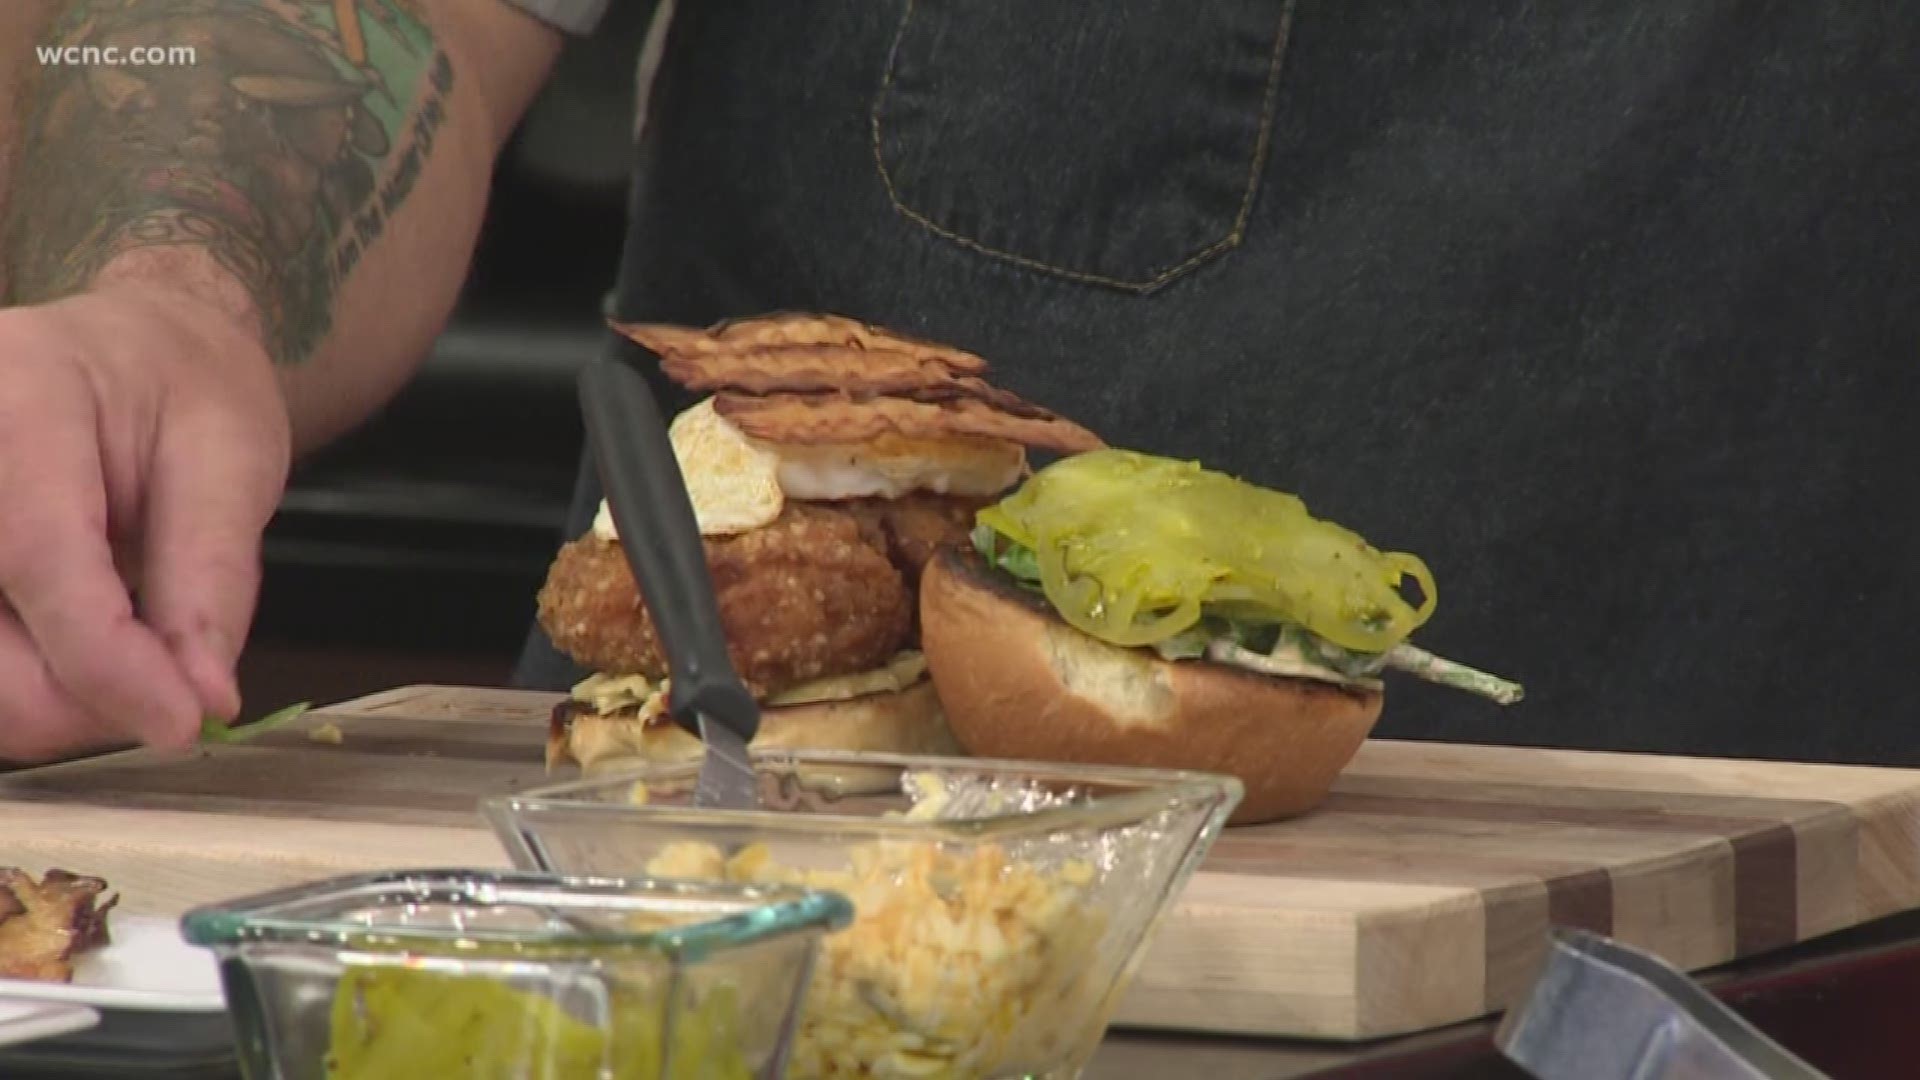 The owners of Streamline Kitchen, a popular food truck in Charlotte, show us how to make their most popular sandwich.